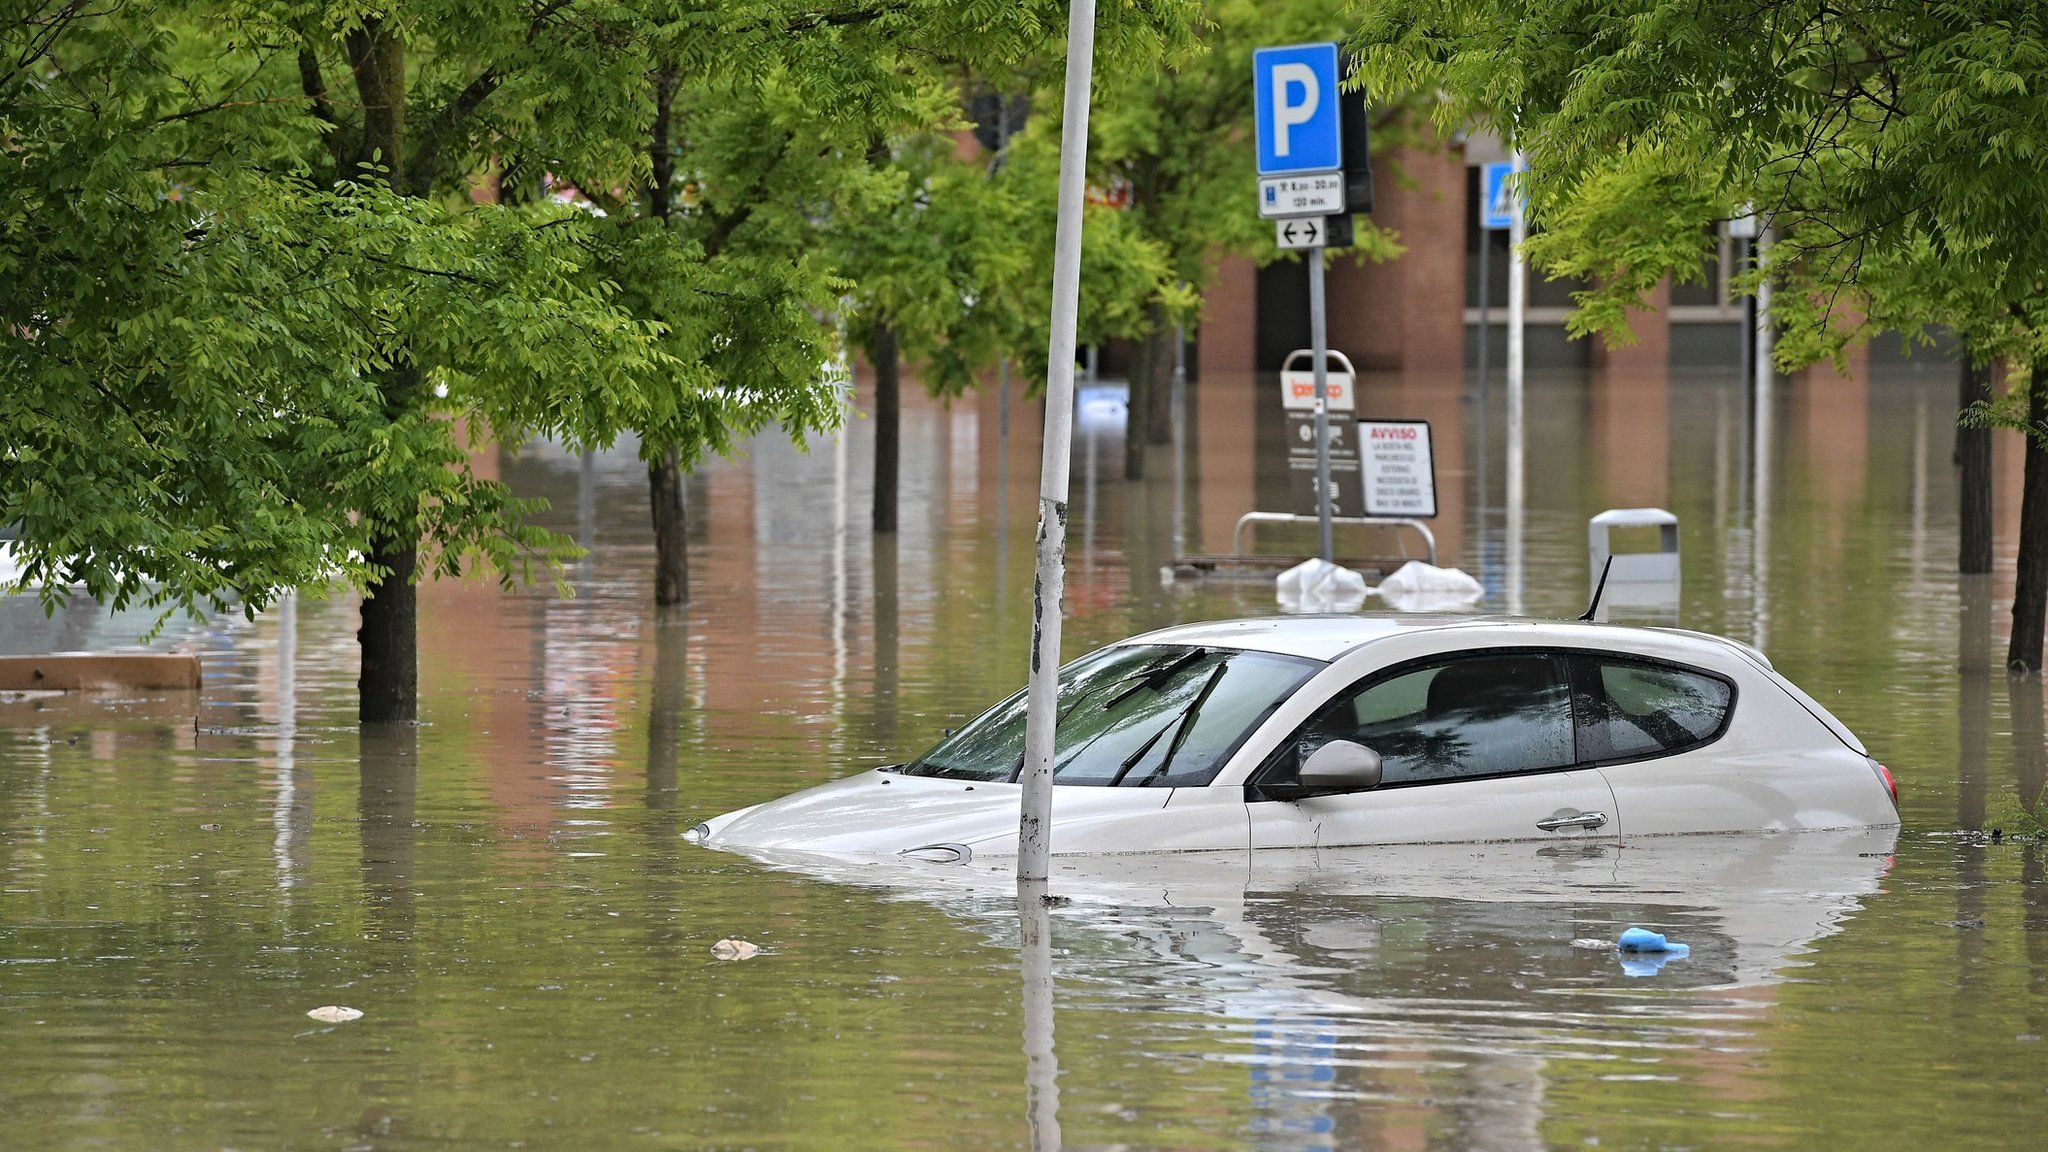 Car in a flooded supermarket area after heavy rains have caused major floodings in Cesena, Italy